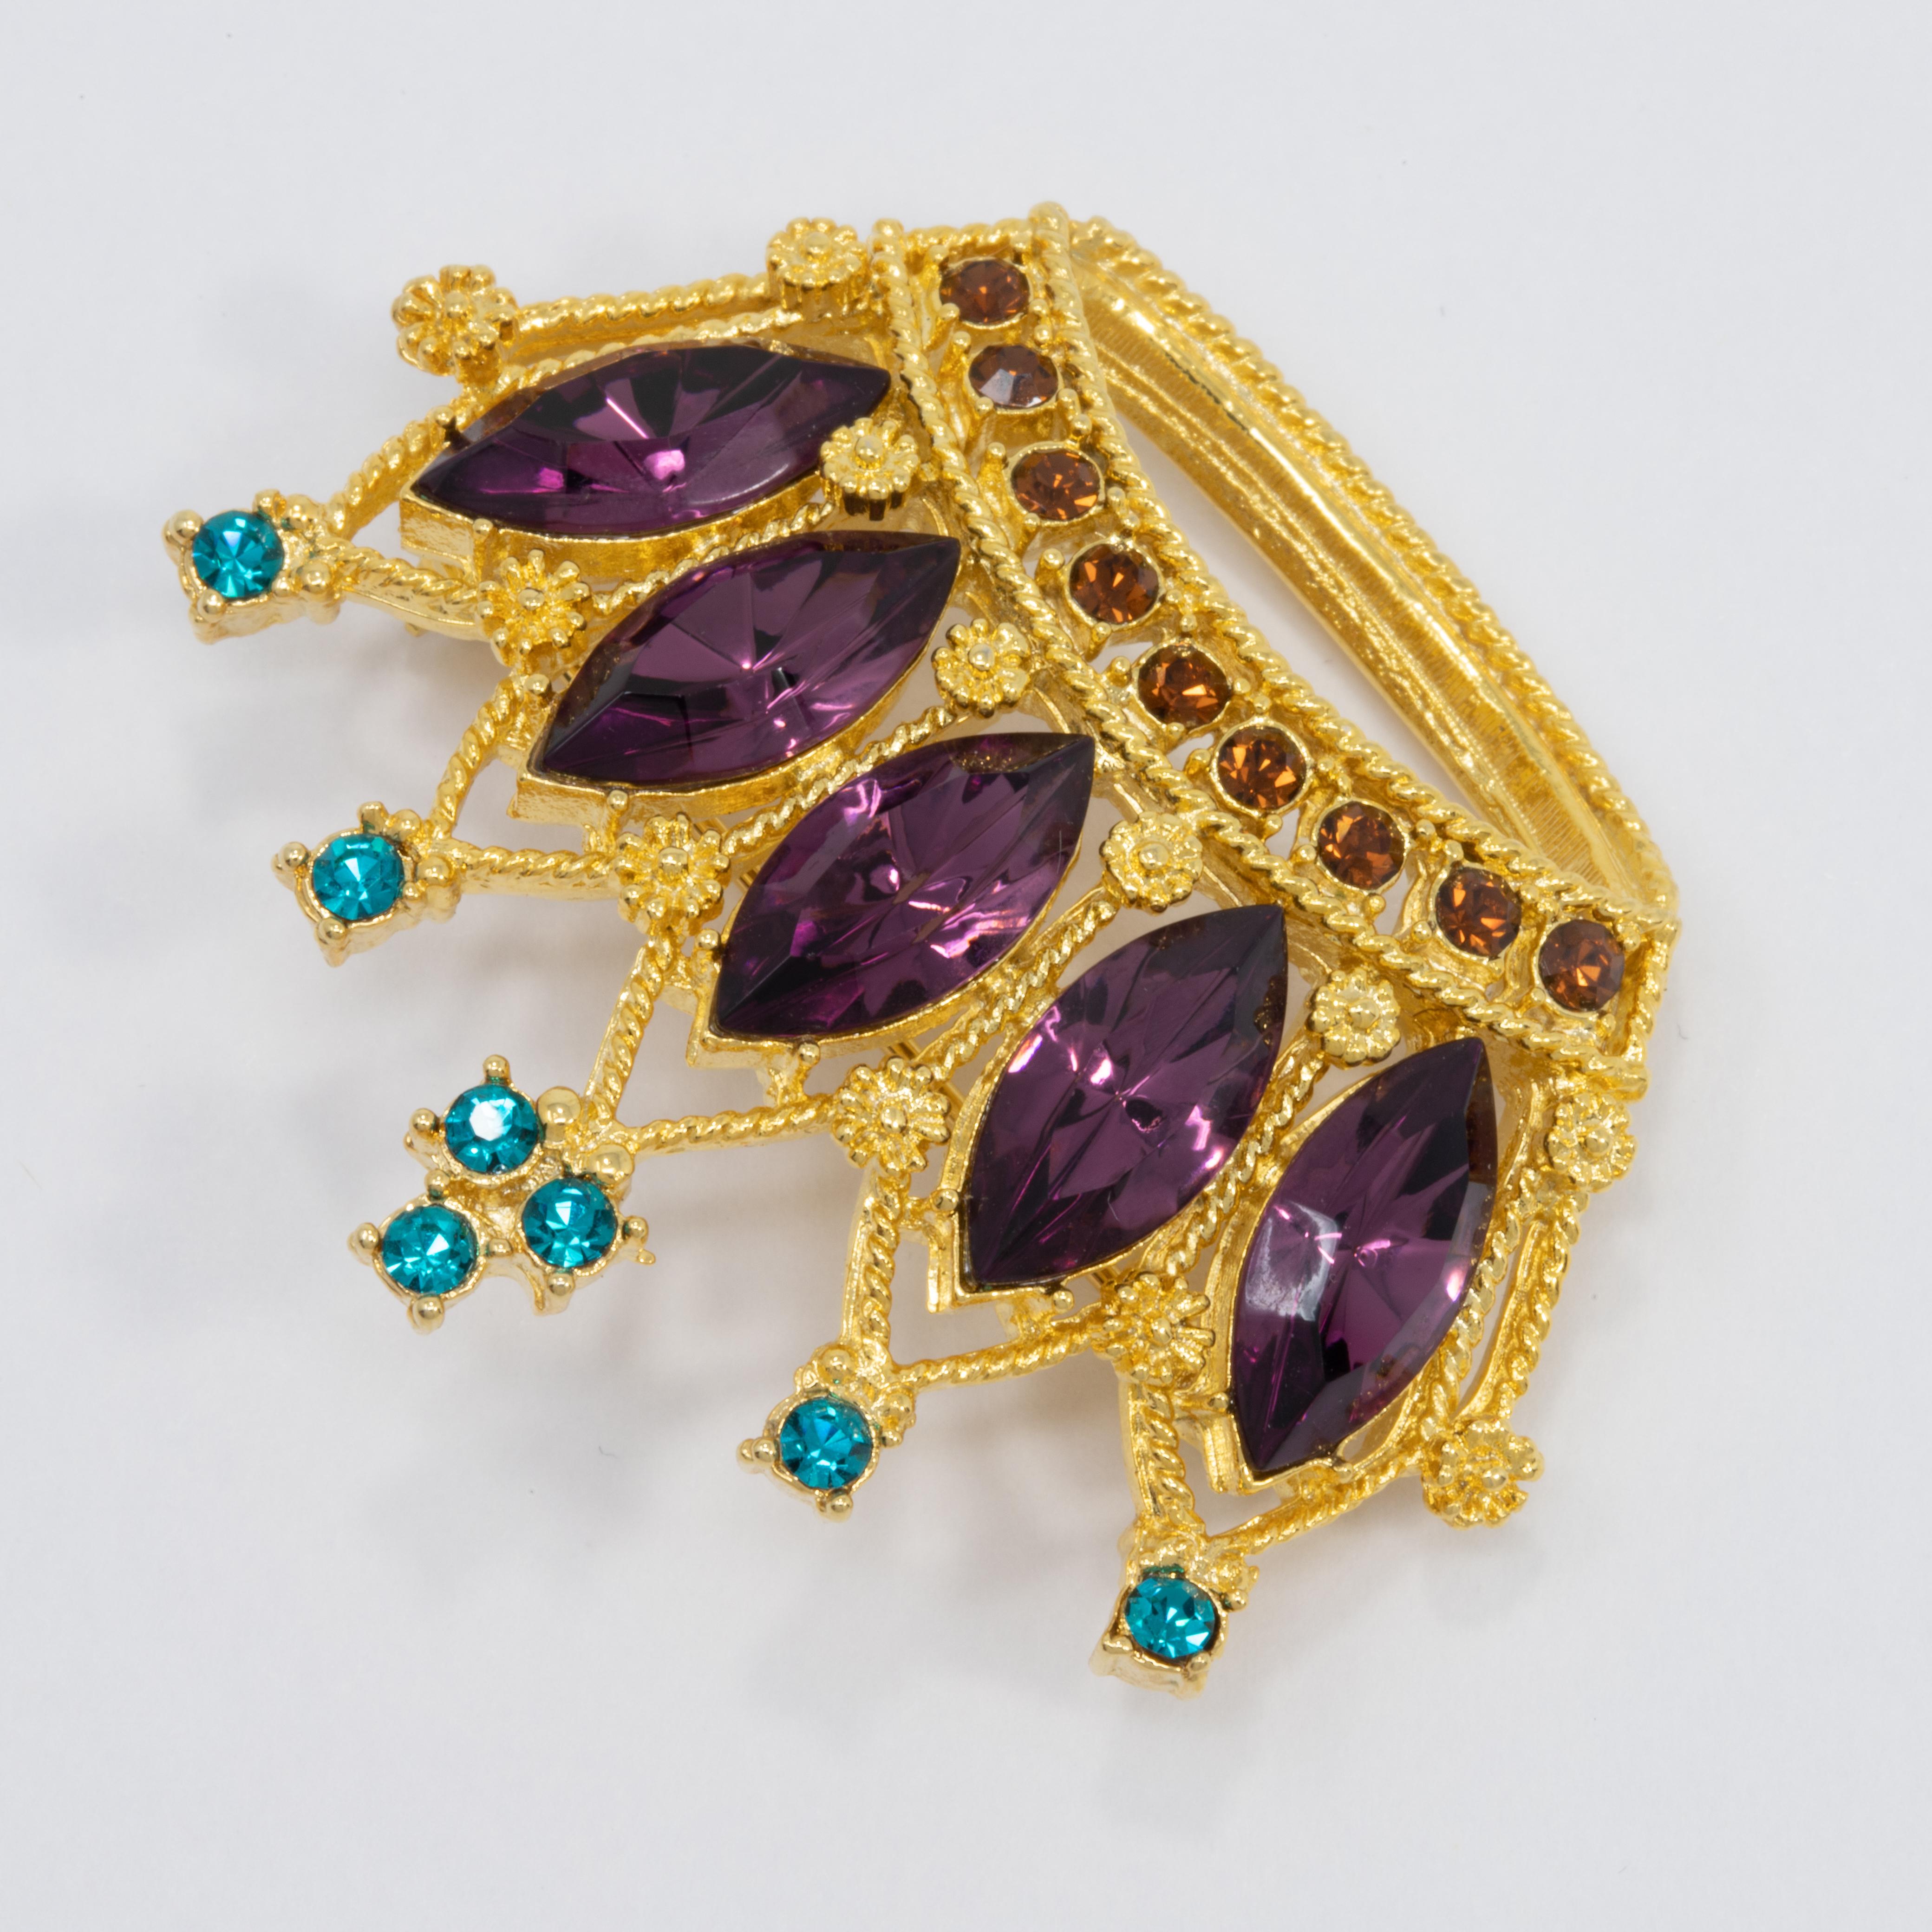 A regal golden crown, decorated with amethyst, emerald, and topaz crystals. 

A vintage pin brooch - never worn, wonderfully preserved!